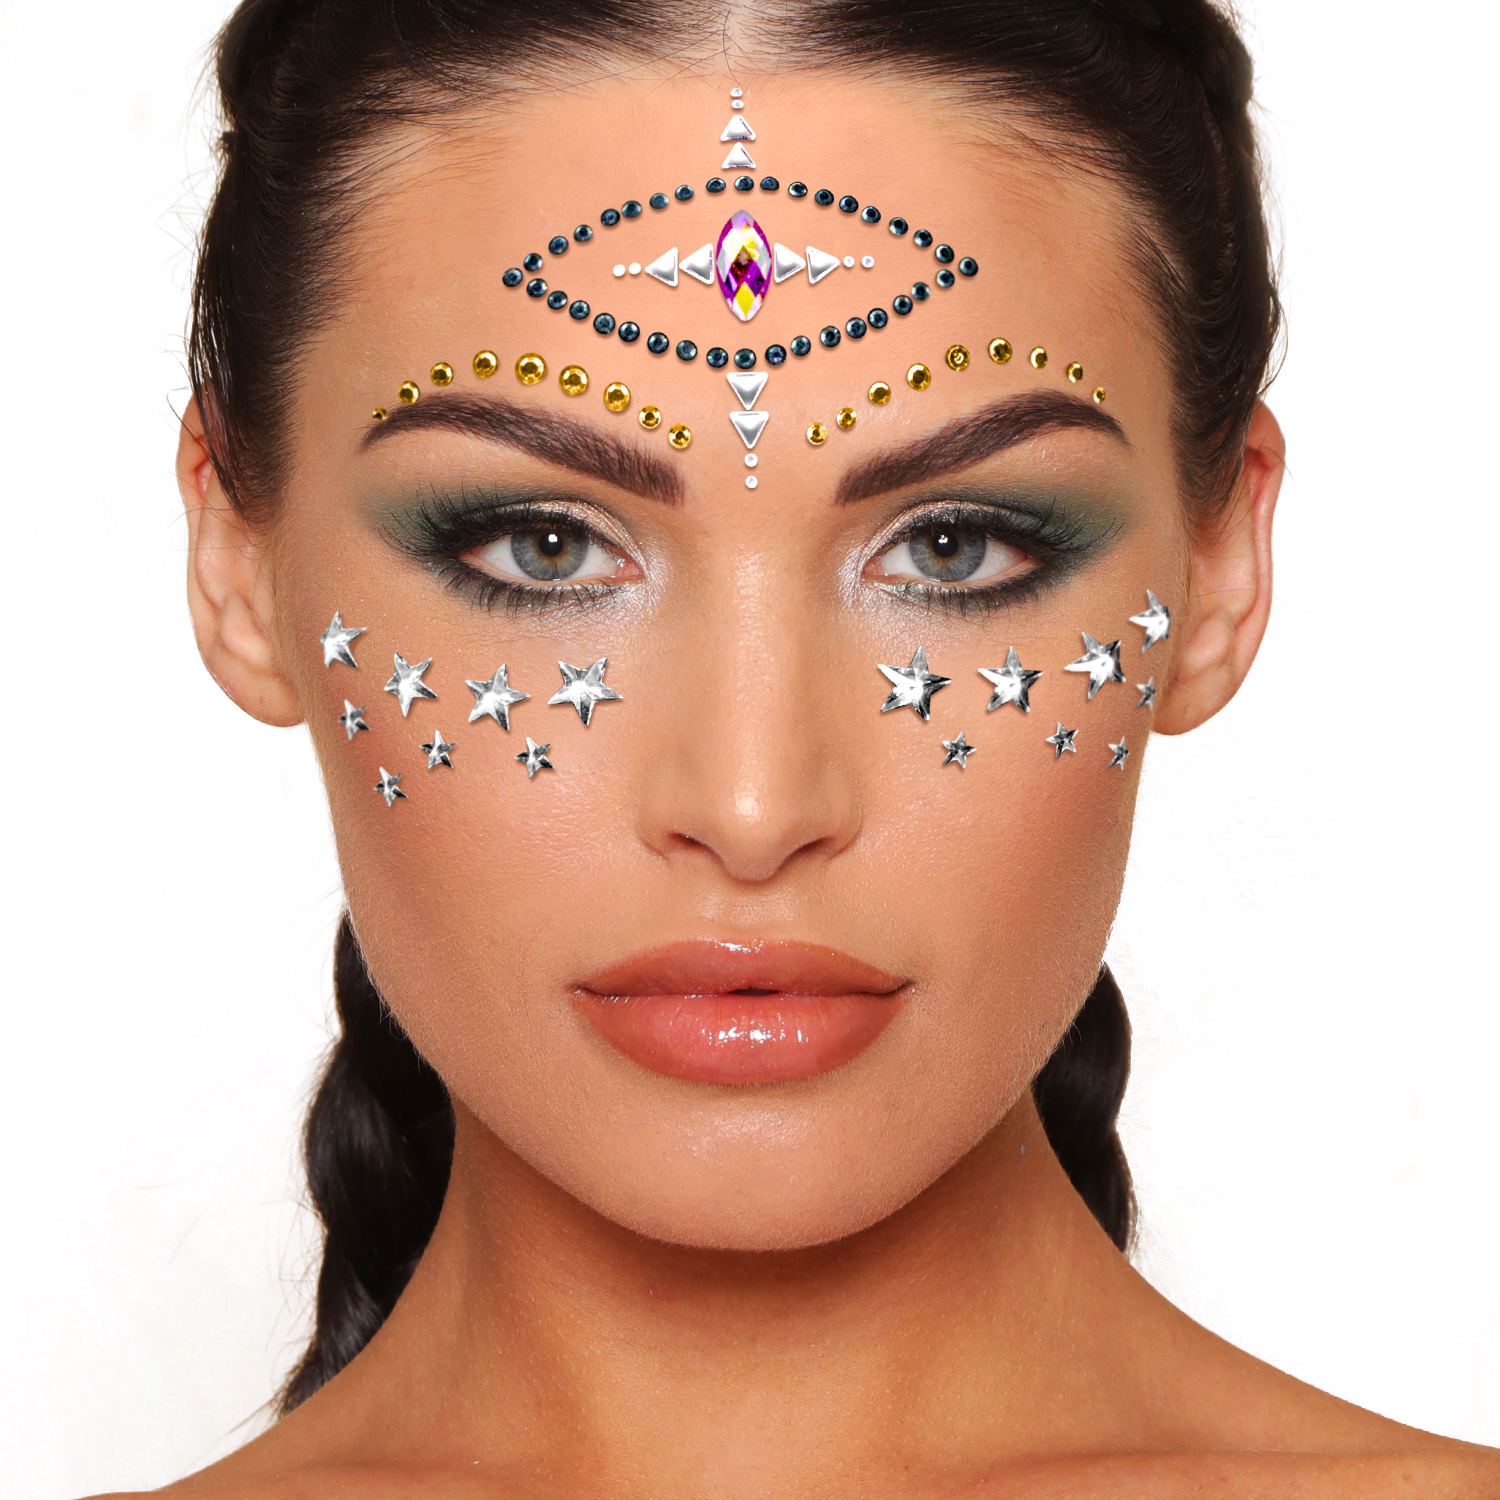 Fortune Teller Face Jewels on Model by Glitter Me Up ™ | PaintGlow